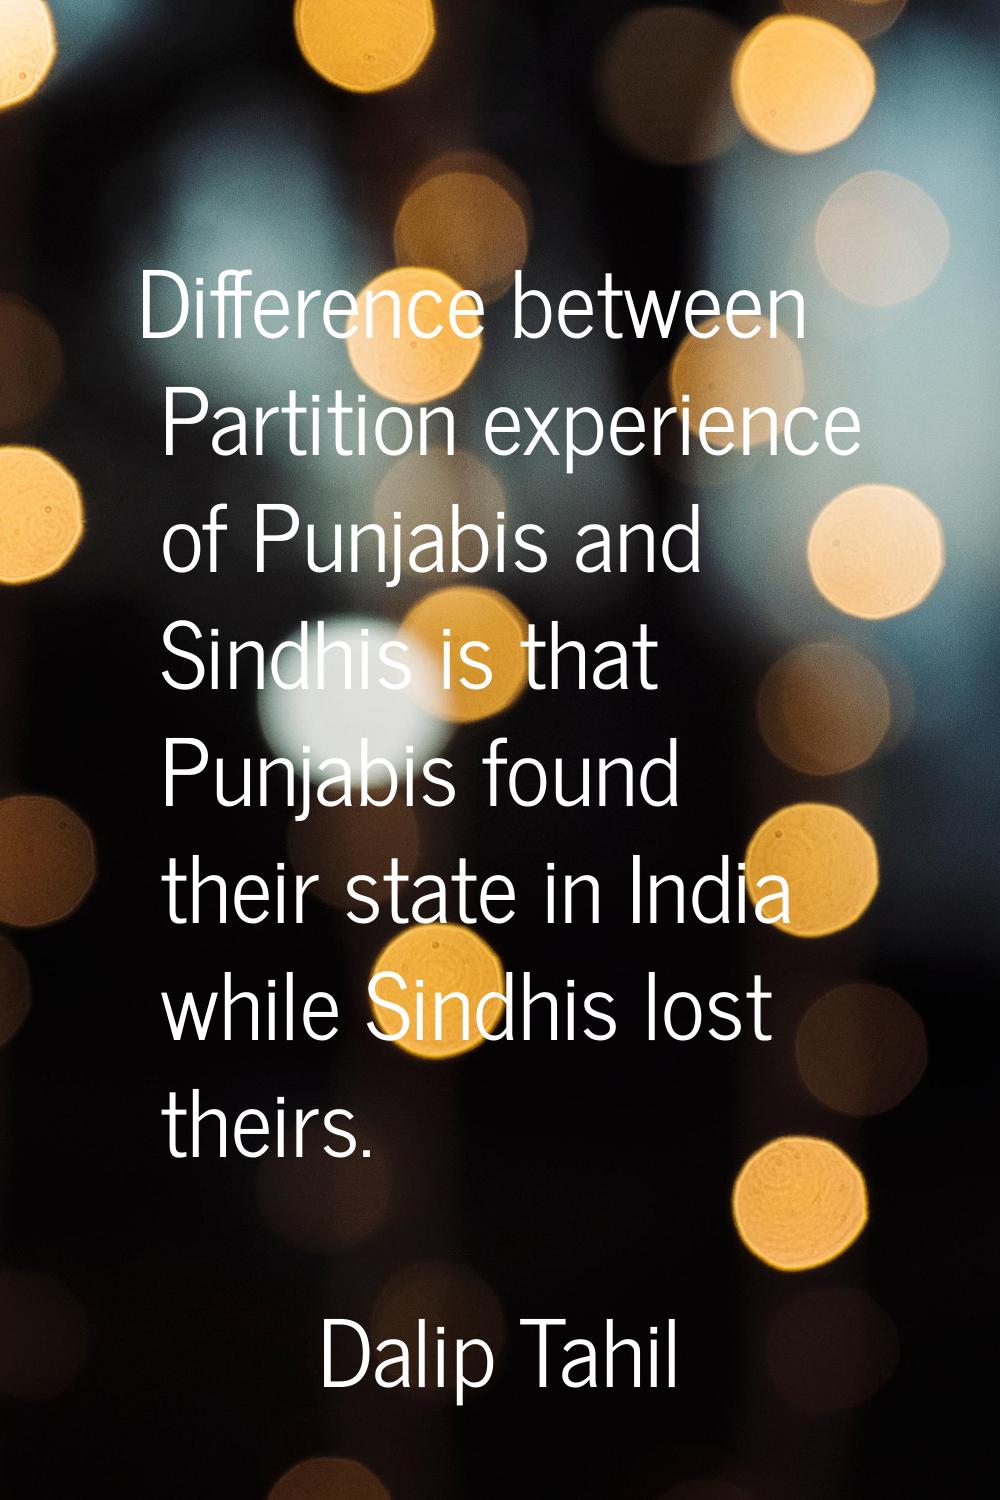 Difference between Partition experience of Punjabis and Sindhis is that Punjabis found their state 